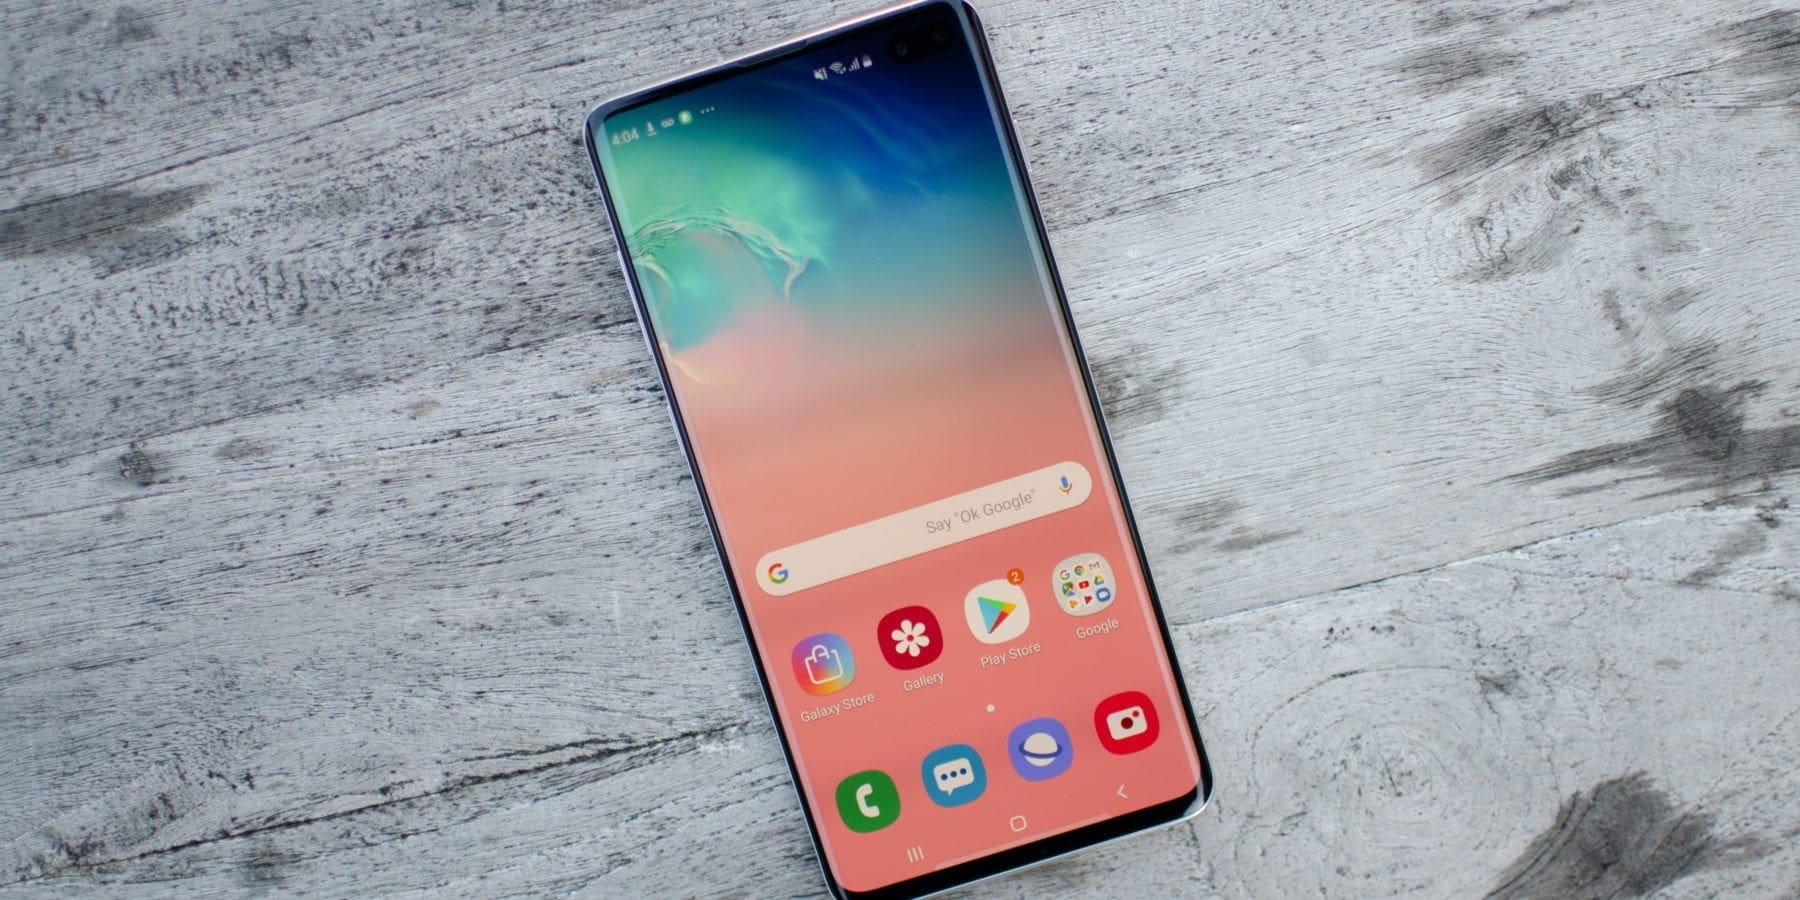 According to Samsung, you need to keep your Galaxy S10 15 mm away from your body just to be within the legal exposure limits.